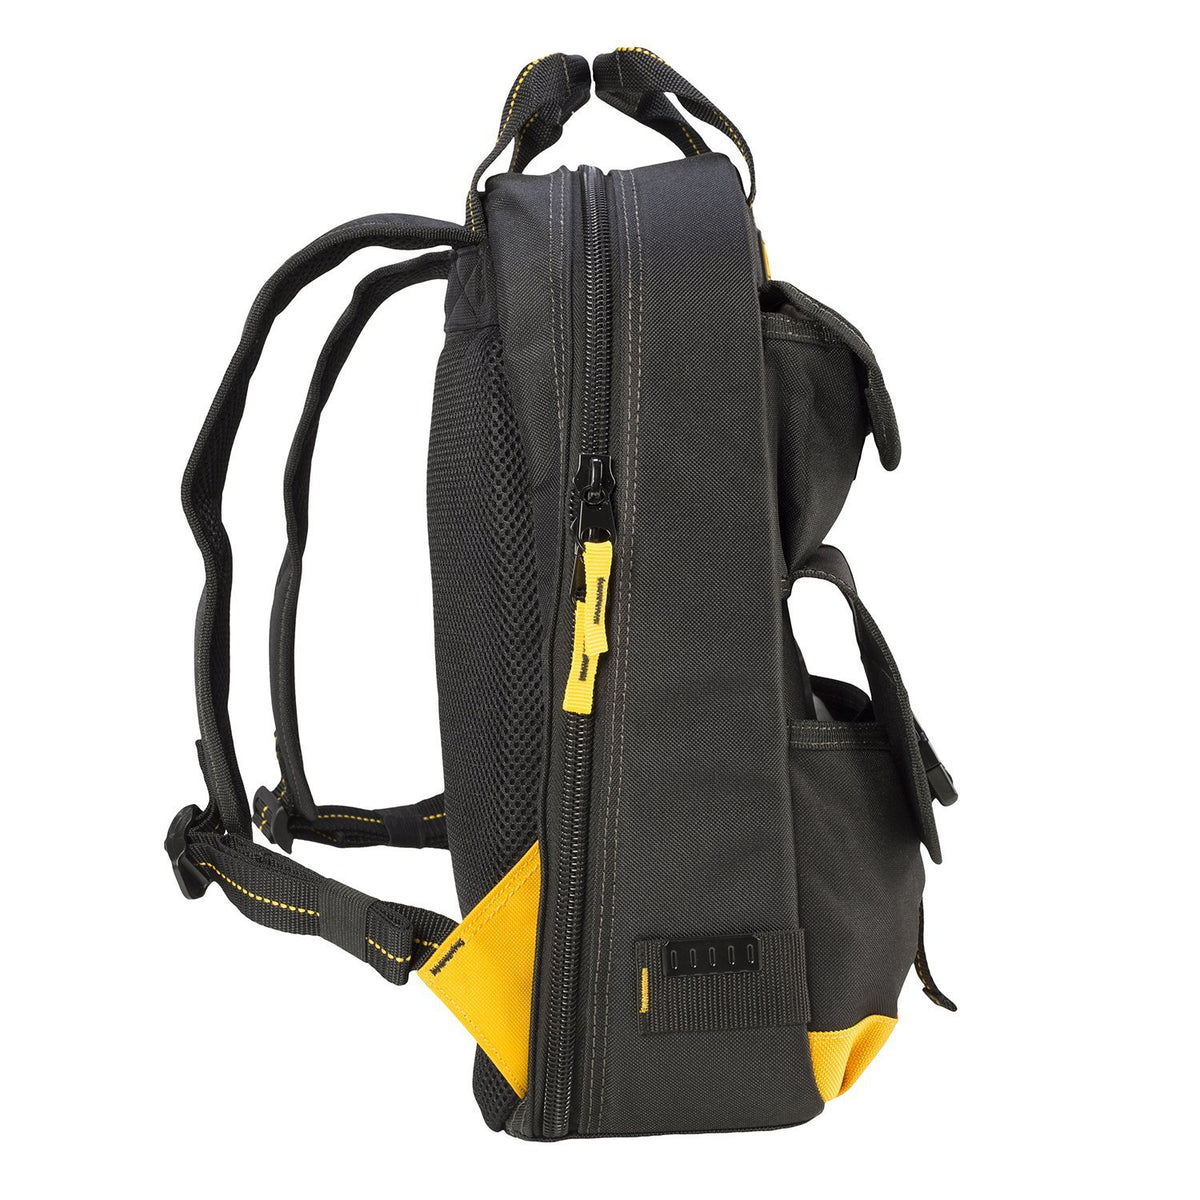 Buy dewalt dgc530 - Online store for safety & organization, tool bags in USA, on sale, low price, discount deals, coupon code